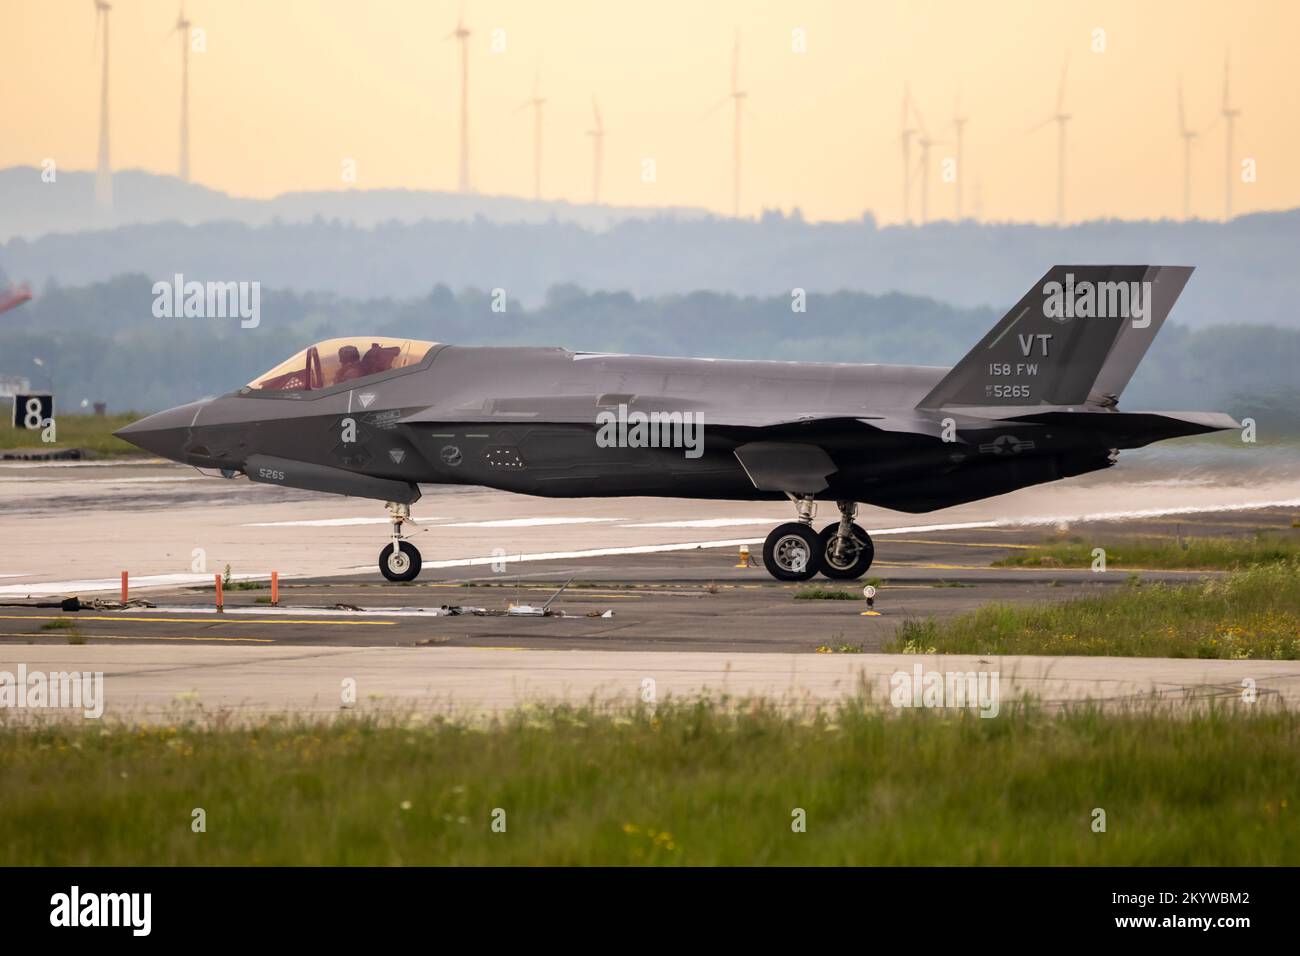 Vermont Air National Guard's 158th Fighter Wing Lockheed Martin F-35 Lightning II. Spangdahlem, Allemagne - 17 mai 2022 Banque D'Images